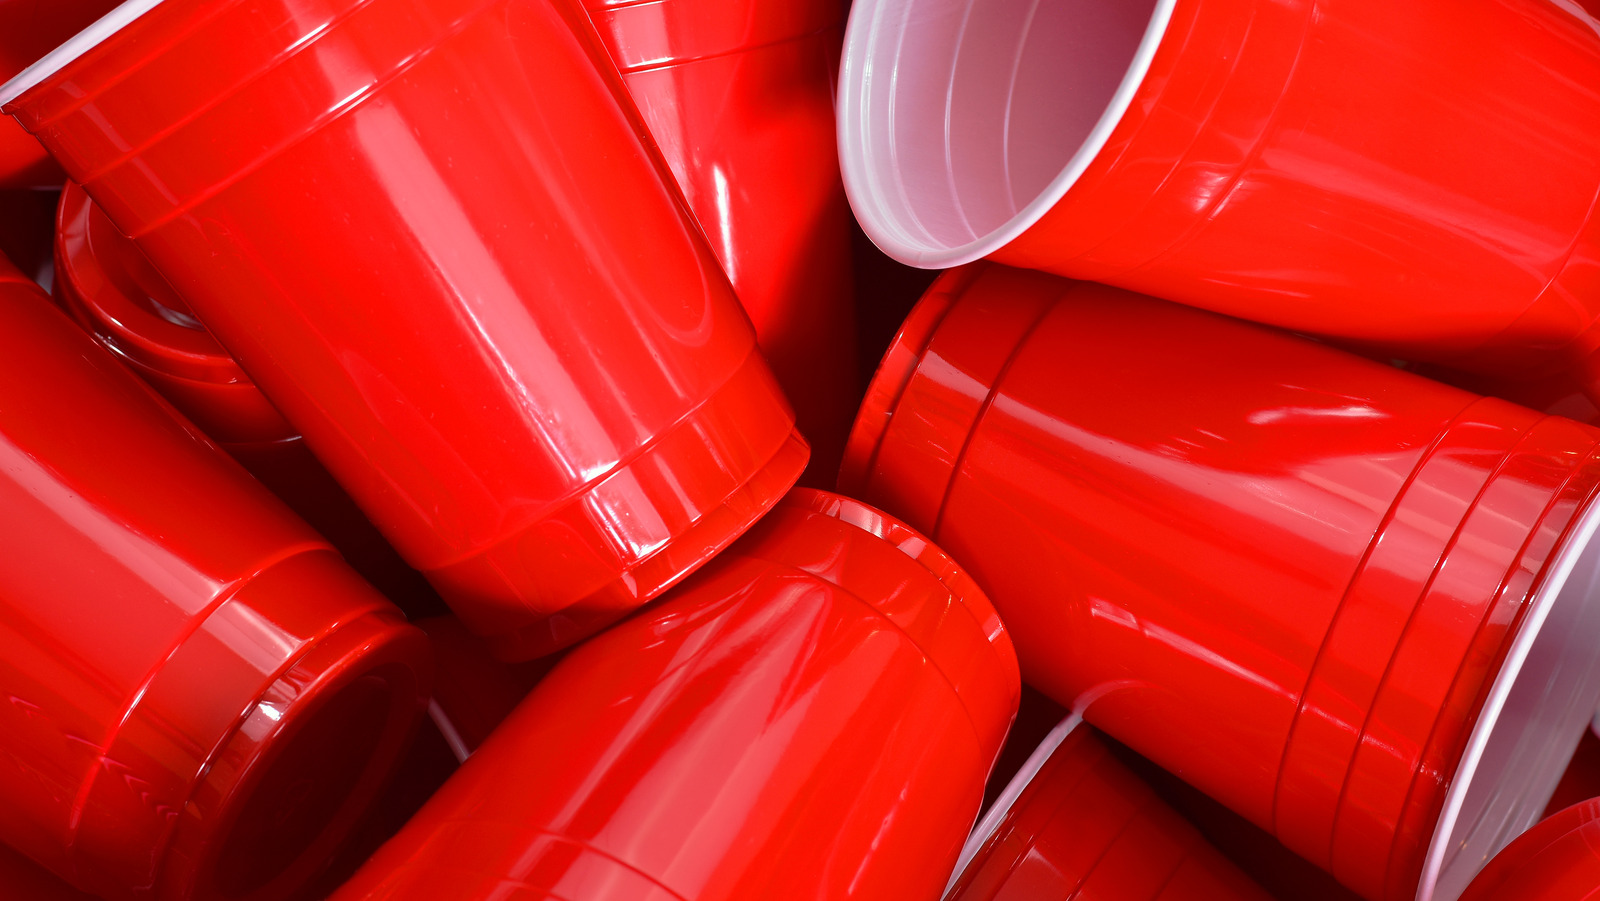 The History Of The Illustrious Red SOLO Cup